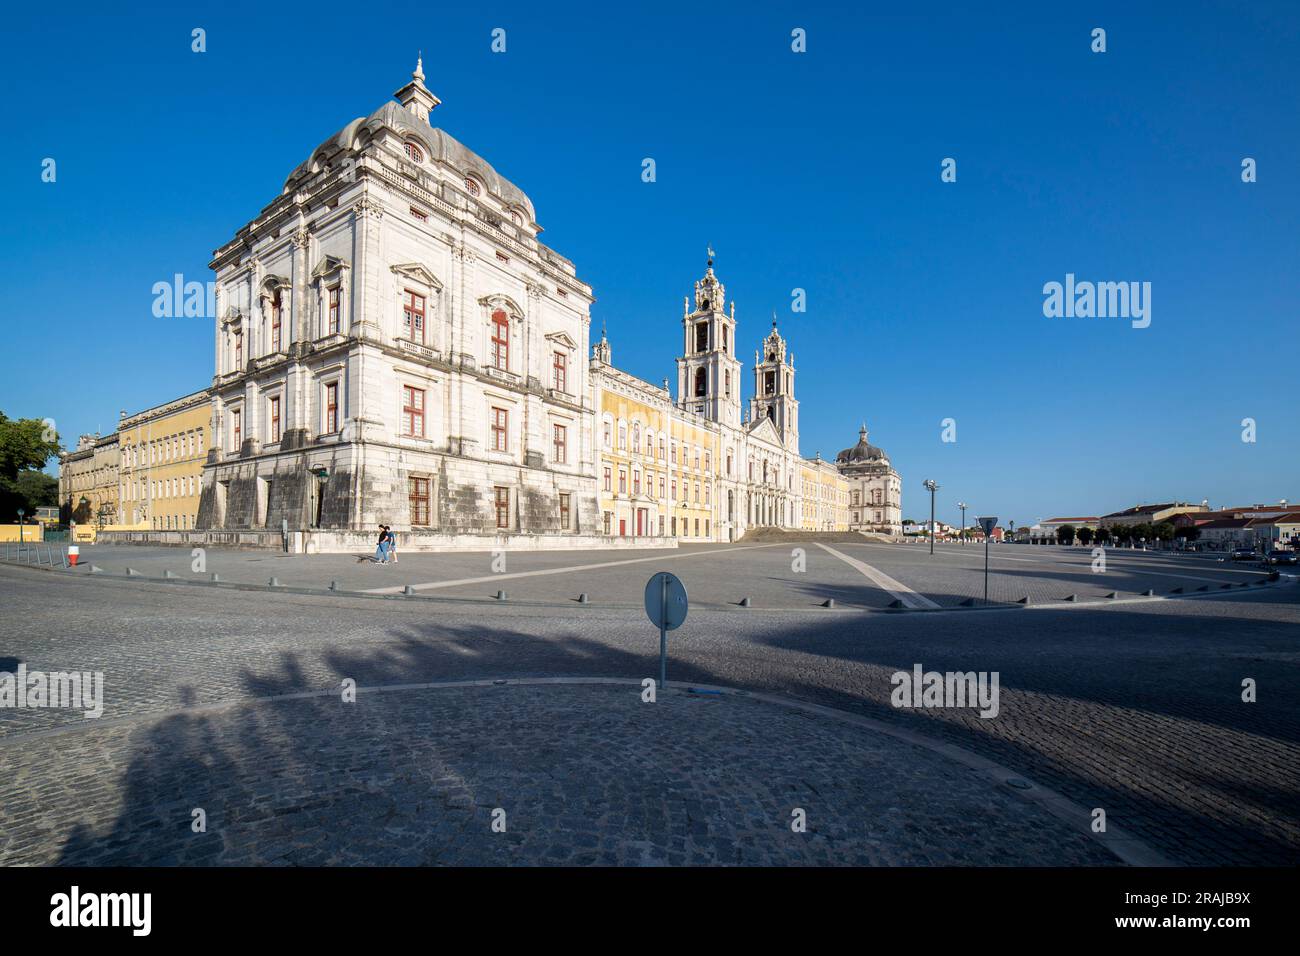 Mafra National Palace or Mafra Convent Baroque architectural ensemble, formed by a royal palace, basilica [church], convent, garden and tapade [huntin Stock Photo